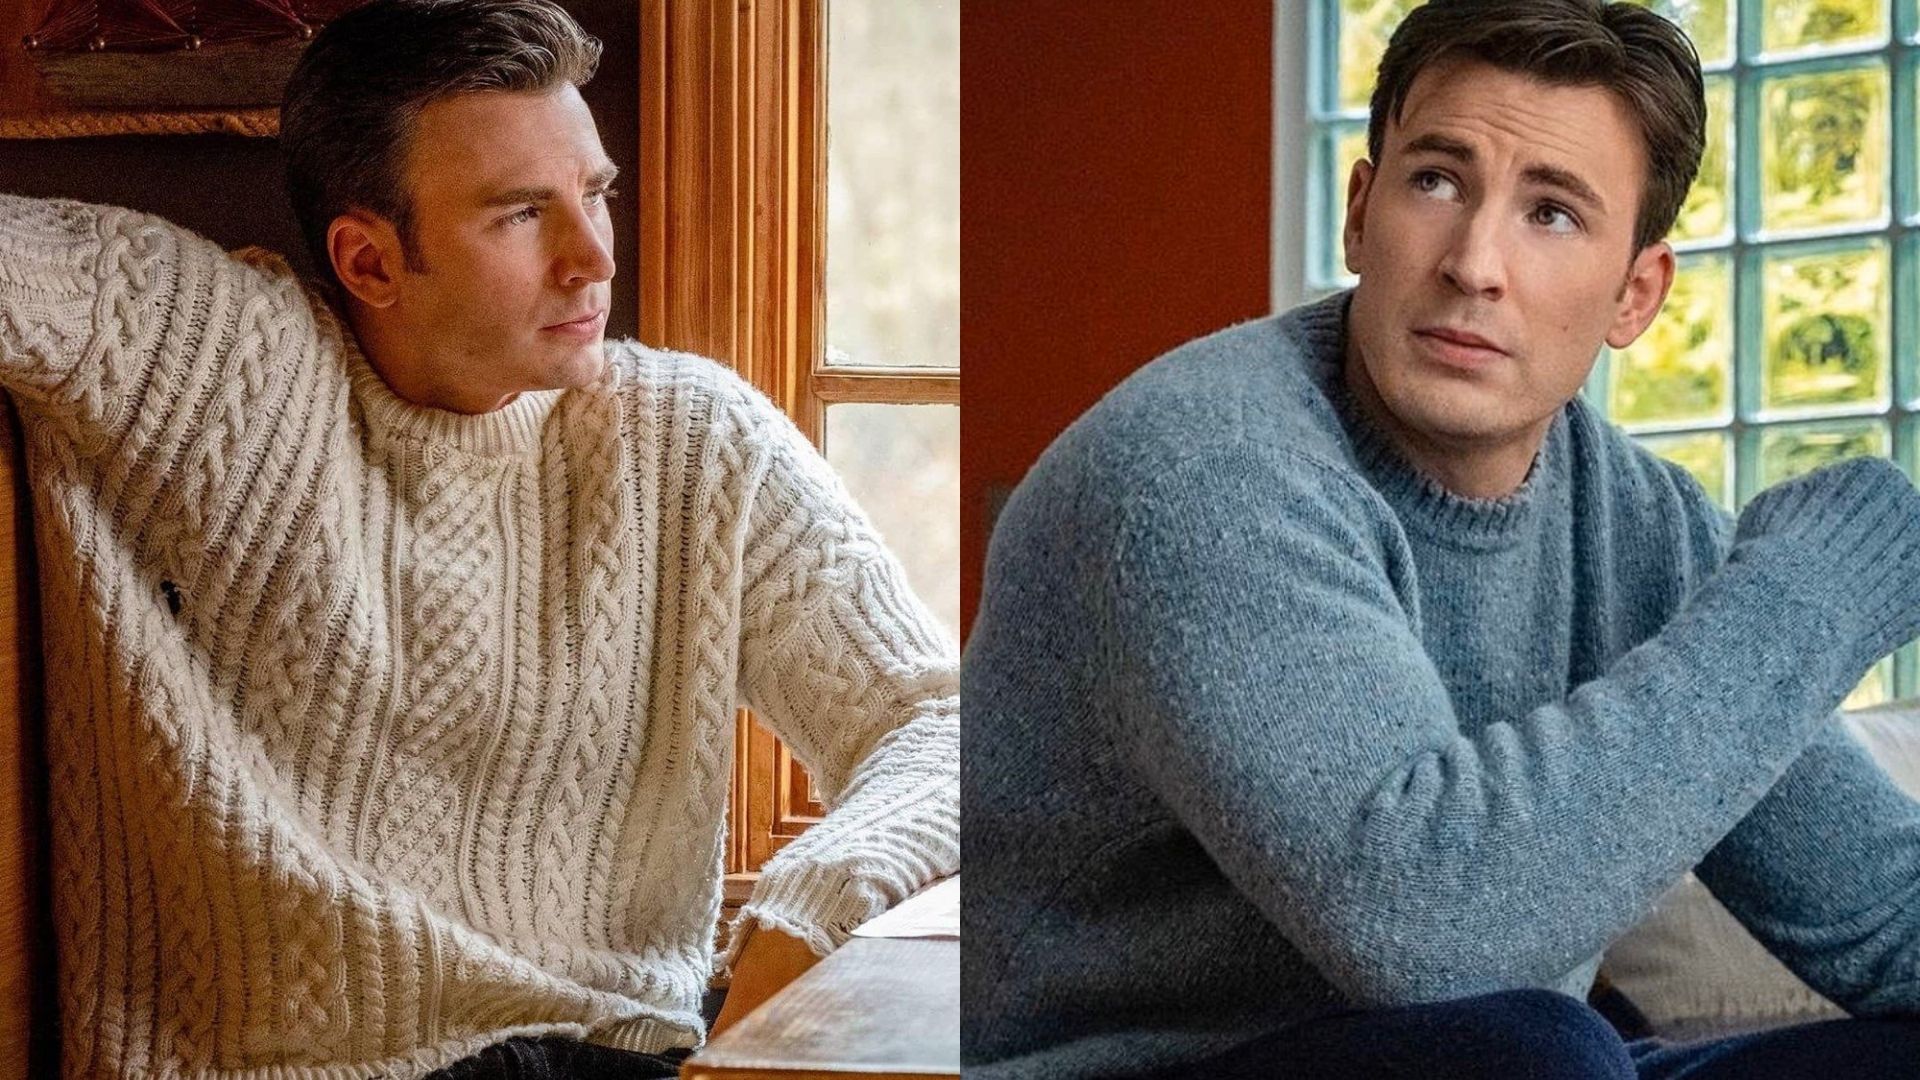 Chris Evans' jumpers in Knives Out